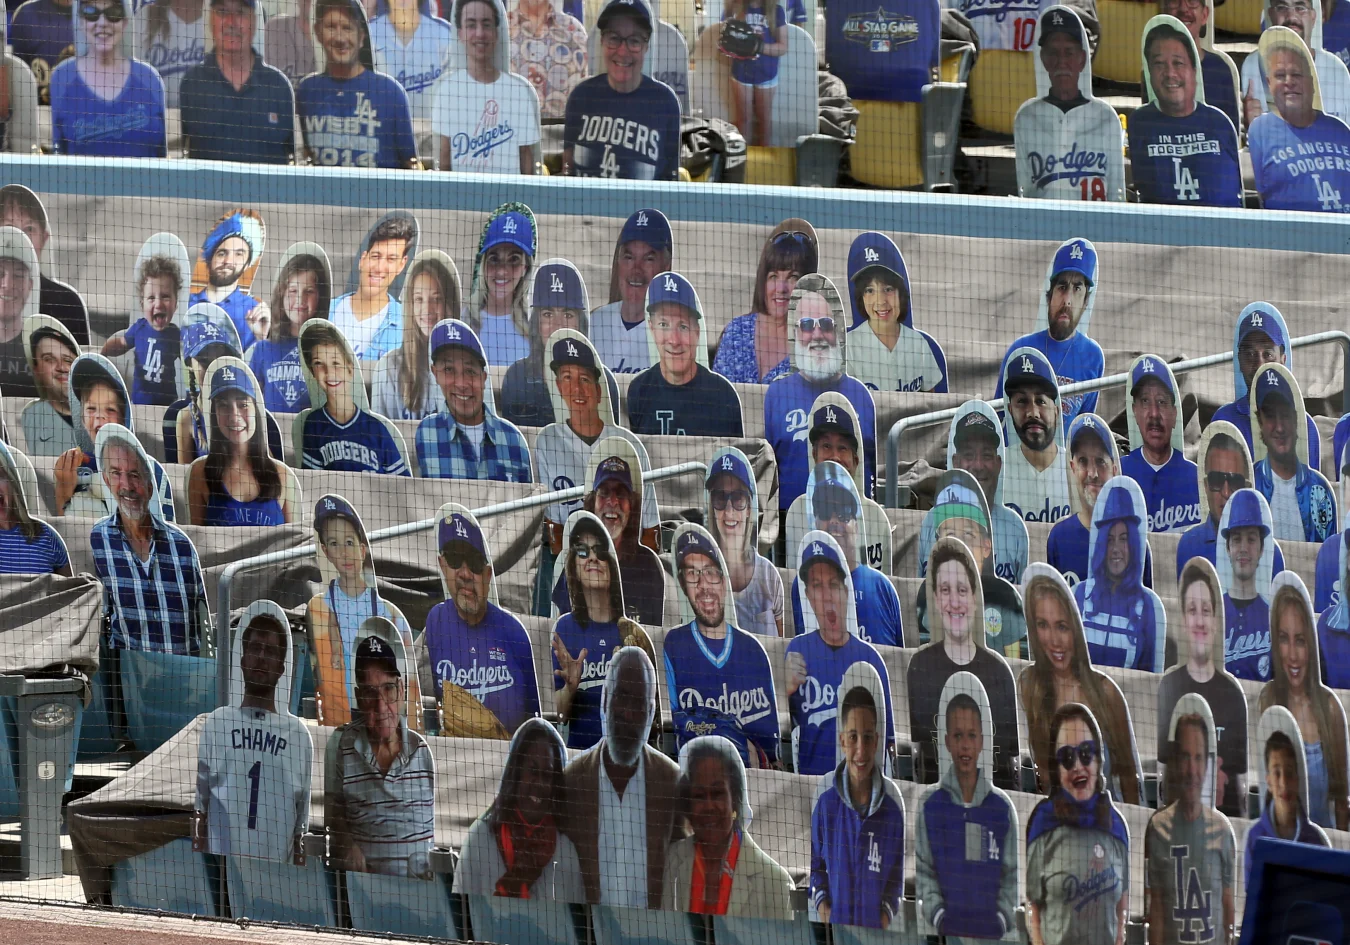 LOS ANGELES, CA - JULY 25: Cardboard cutouts are placed behind home plate during the game against the San Francisco Giants on July 25, 2020, at Dodger Stadium in Los Angeles, CA. (Photo by Adam Davis/Icon Sportswire via Getty Images)